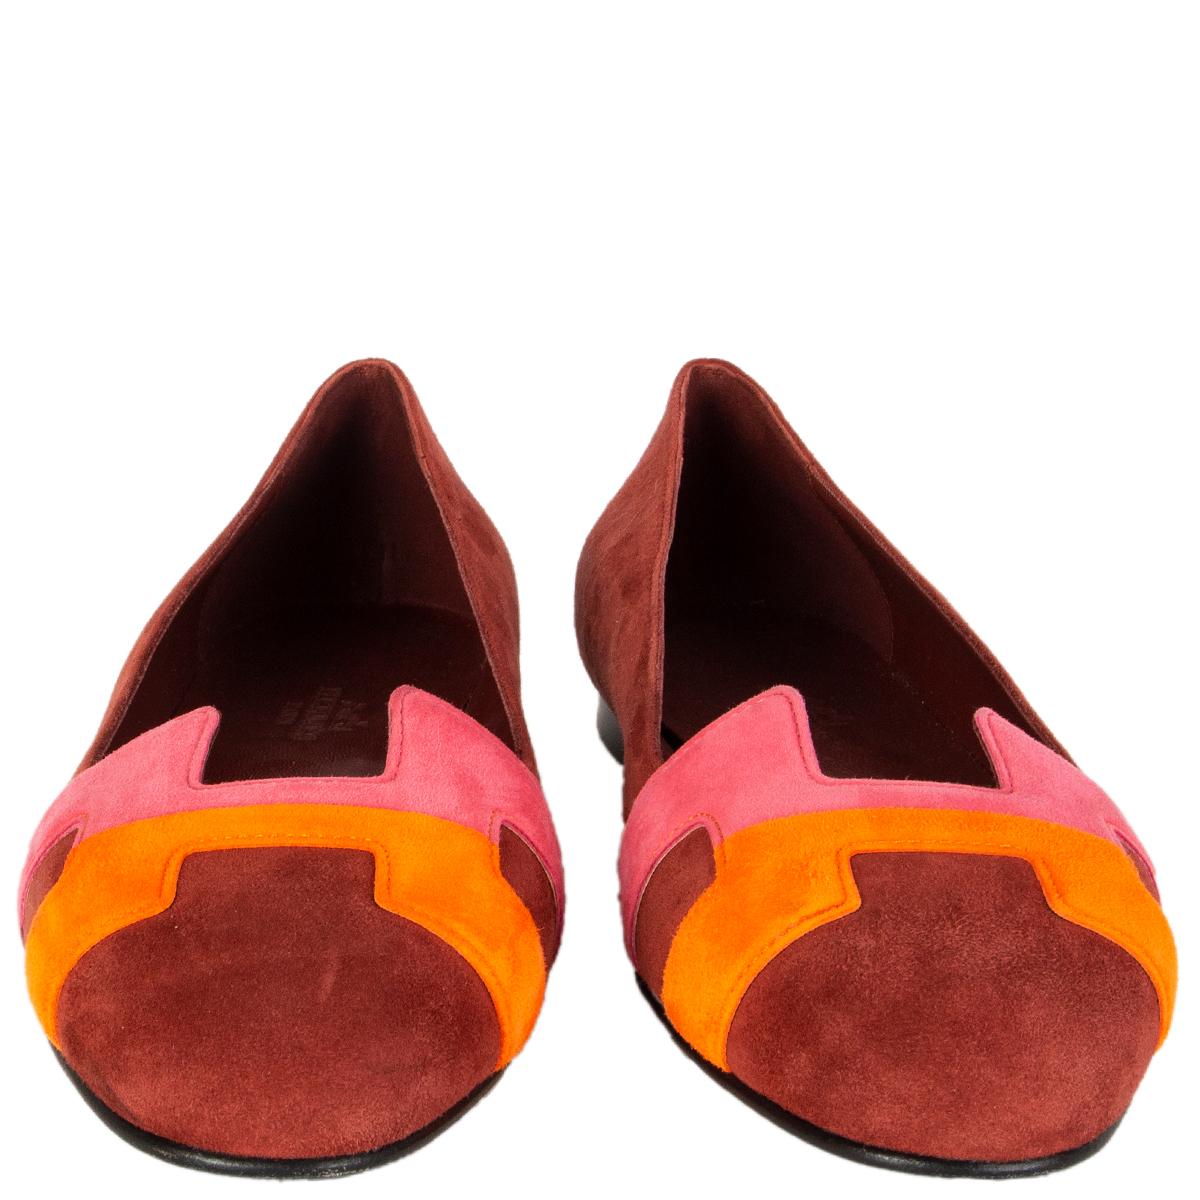 100% authentic Hermès 'Nice' ballerinas in burgundy, pink and orange suede. Have been worn once and are in virtually new condition. 

Measurements
Imprinted Size	36
Shoe Size	36
Inside Sole	24cm (9.4in)
Width	7cm (2.7in)
Heel	1cm (0.4in)

All our